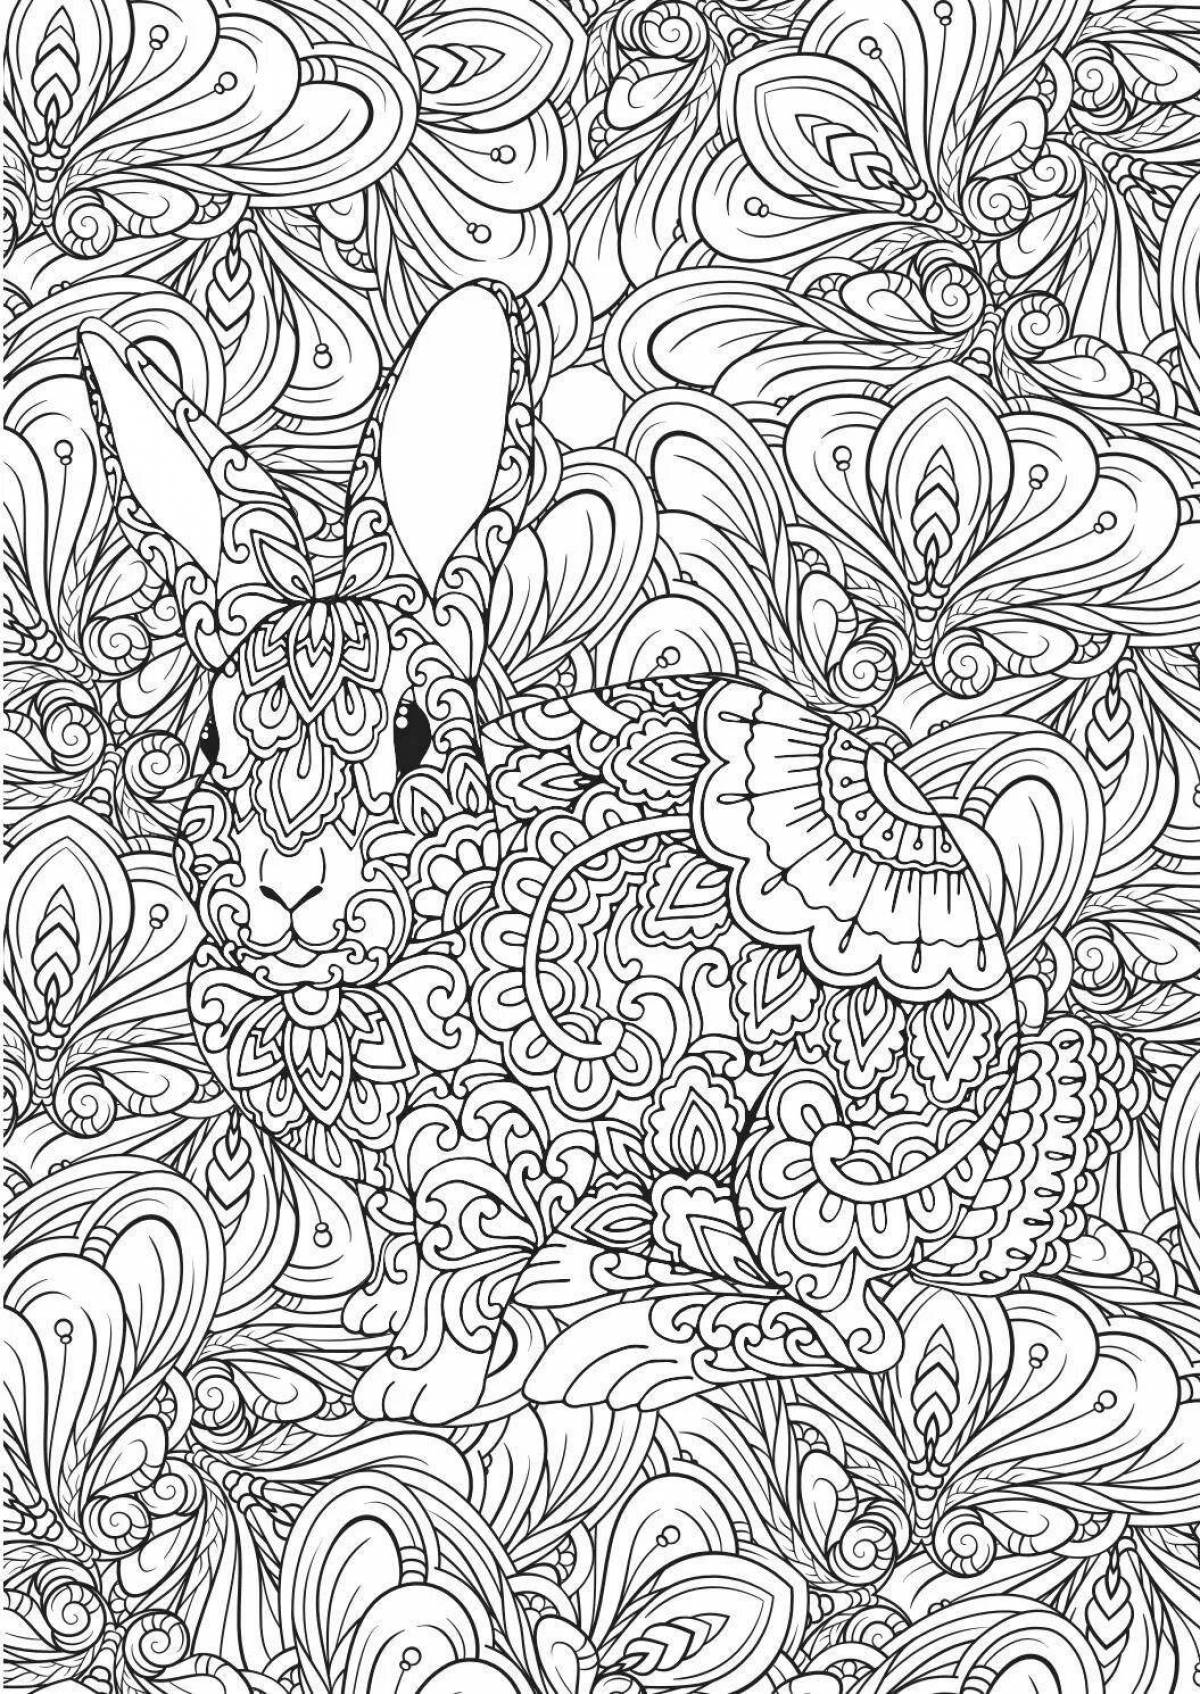 Peaceful coloring is best for adults